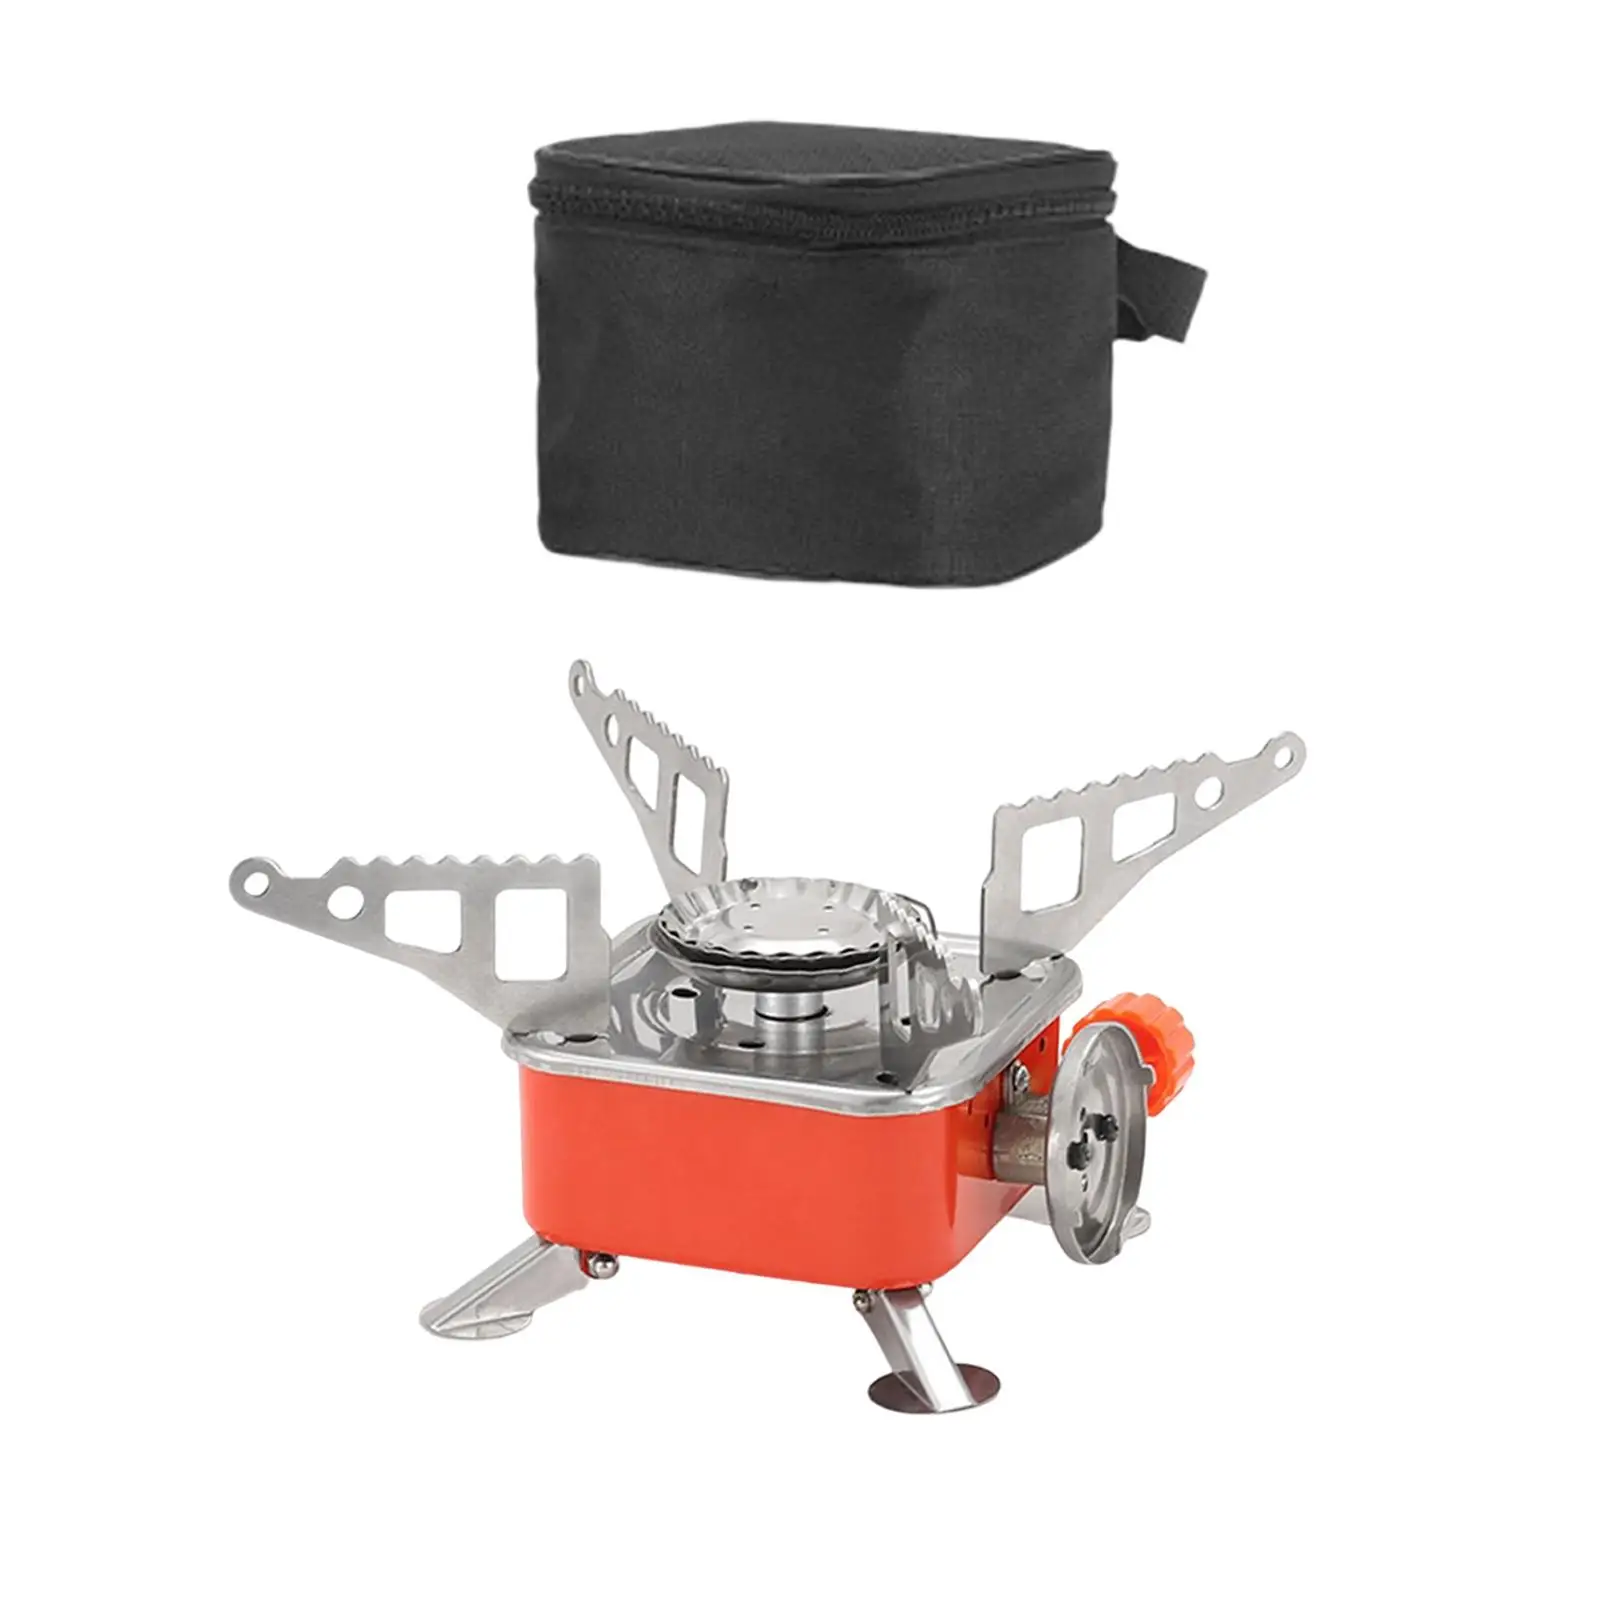 Portable Camping Gas Stove with Piezo Ignition Foldable Ultralight Stove Burner Camp Stove for Fishing Outdoor Backpacking